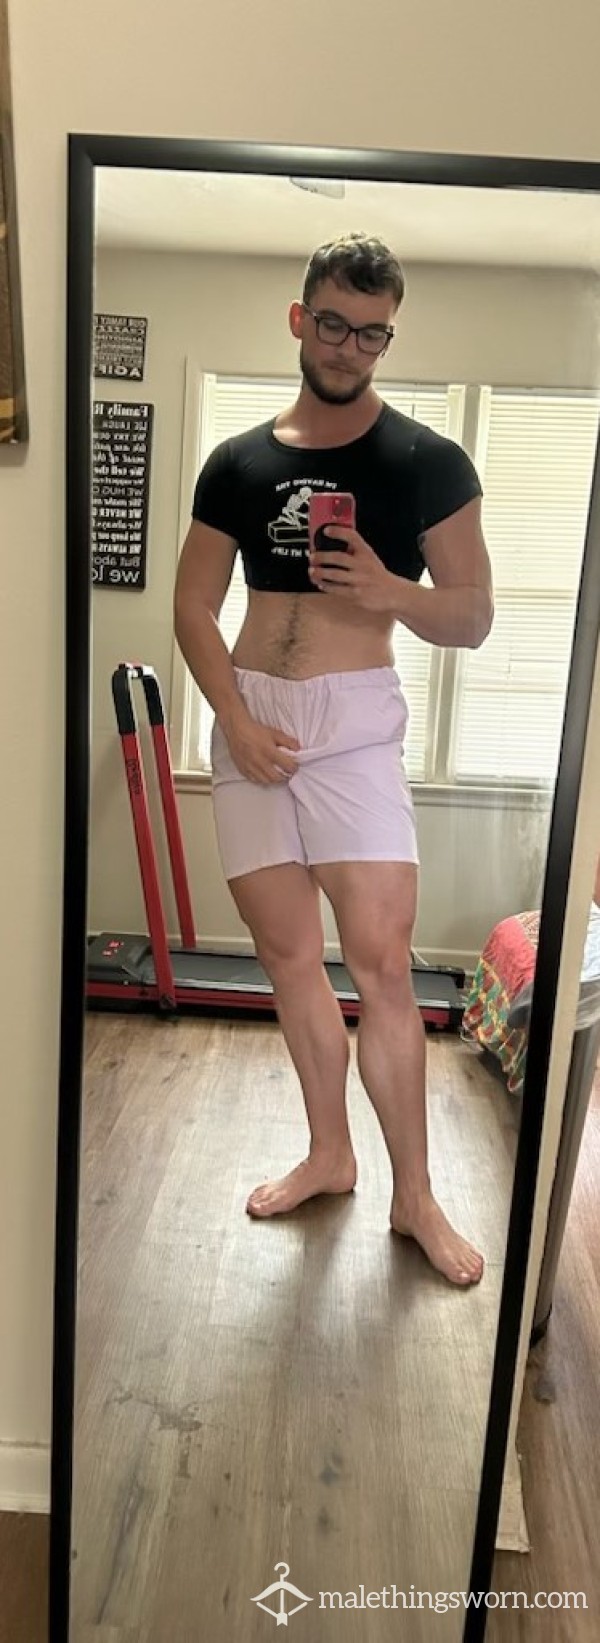 Pink Gym Shorts. Used And Abused During Workouts. Musk Is Heavy With These.